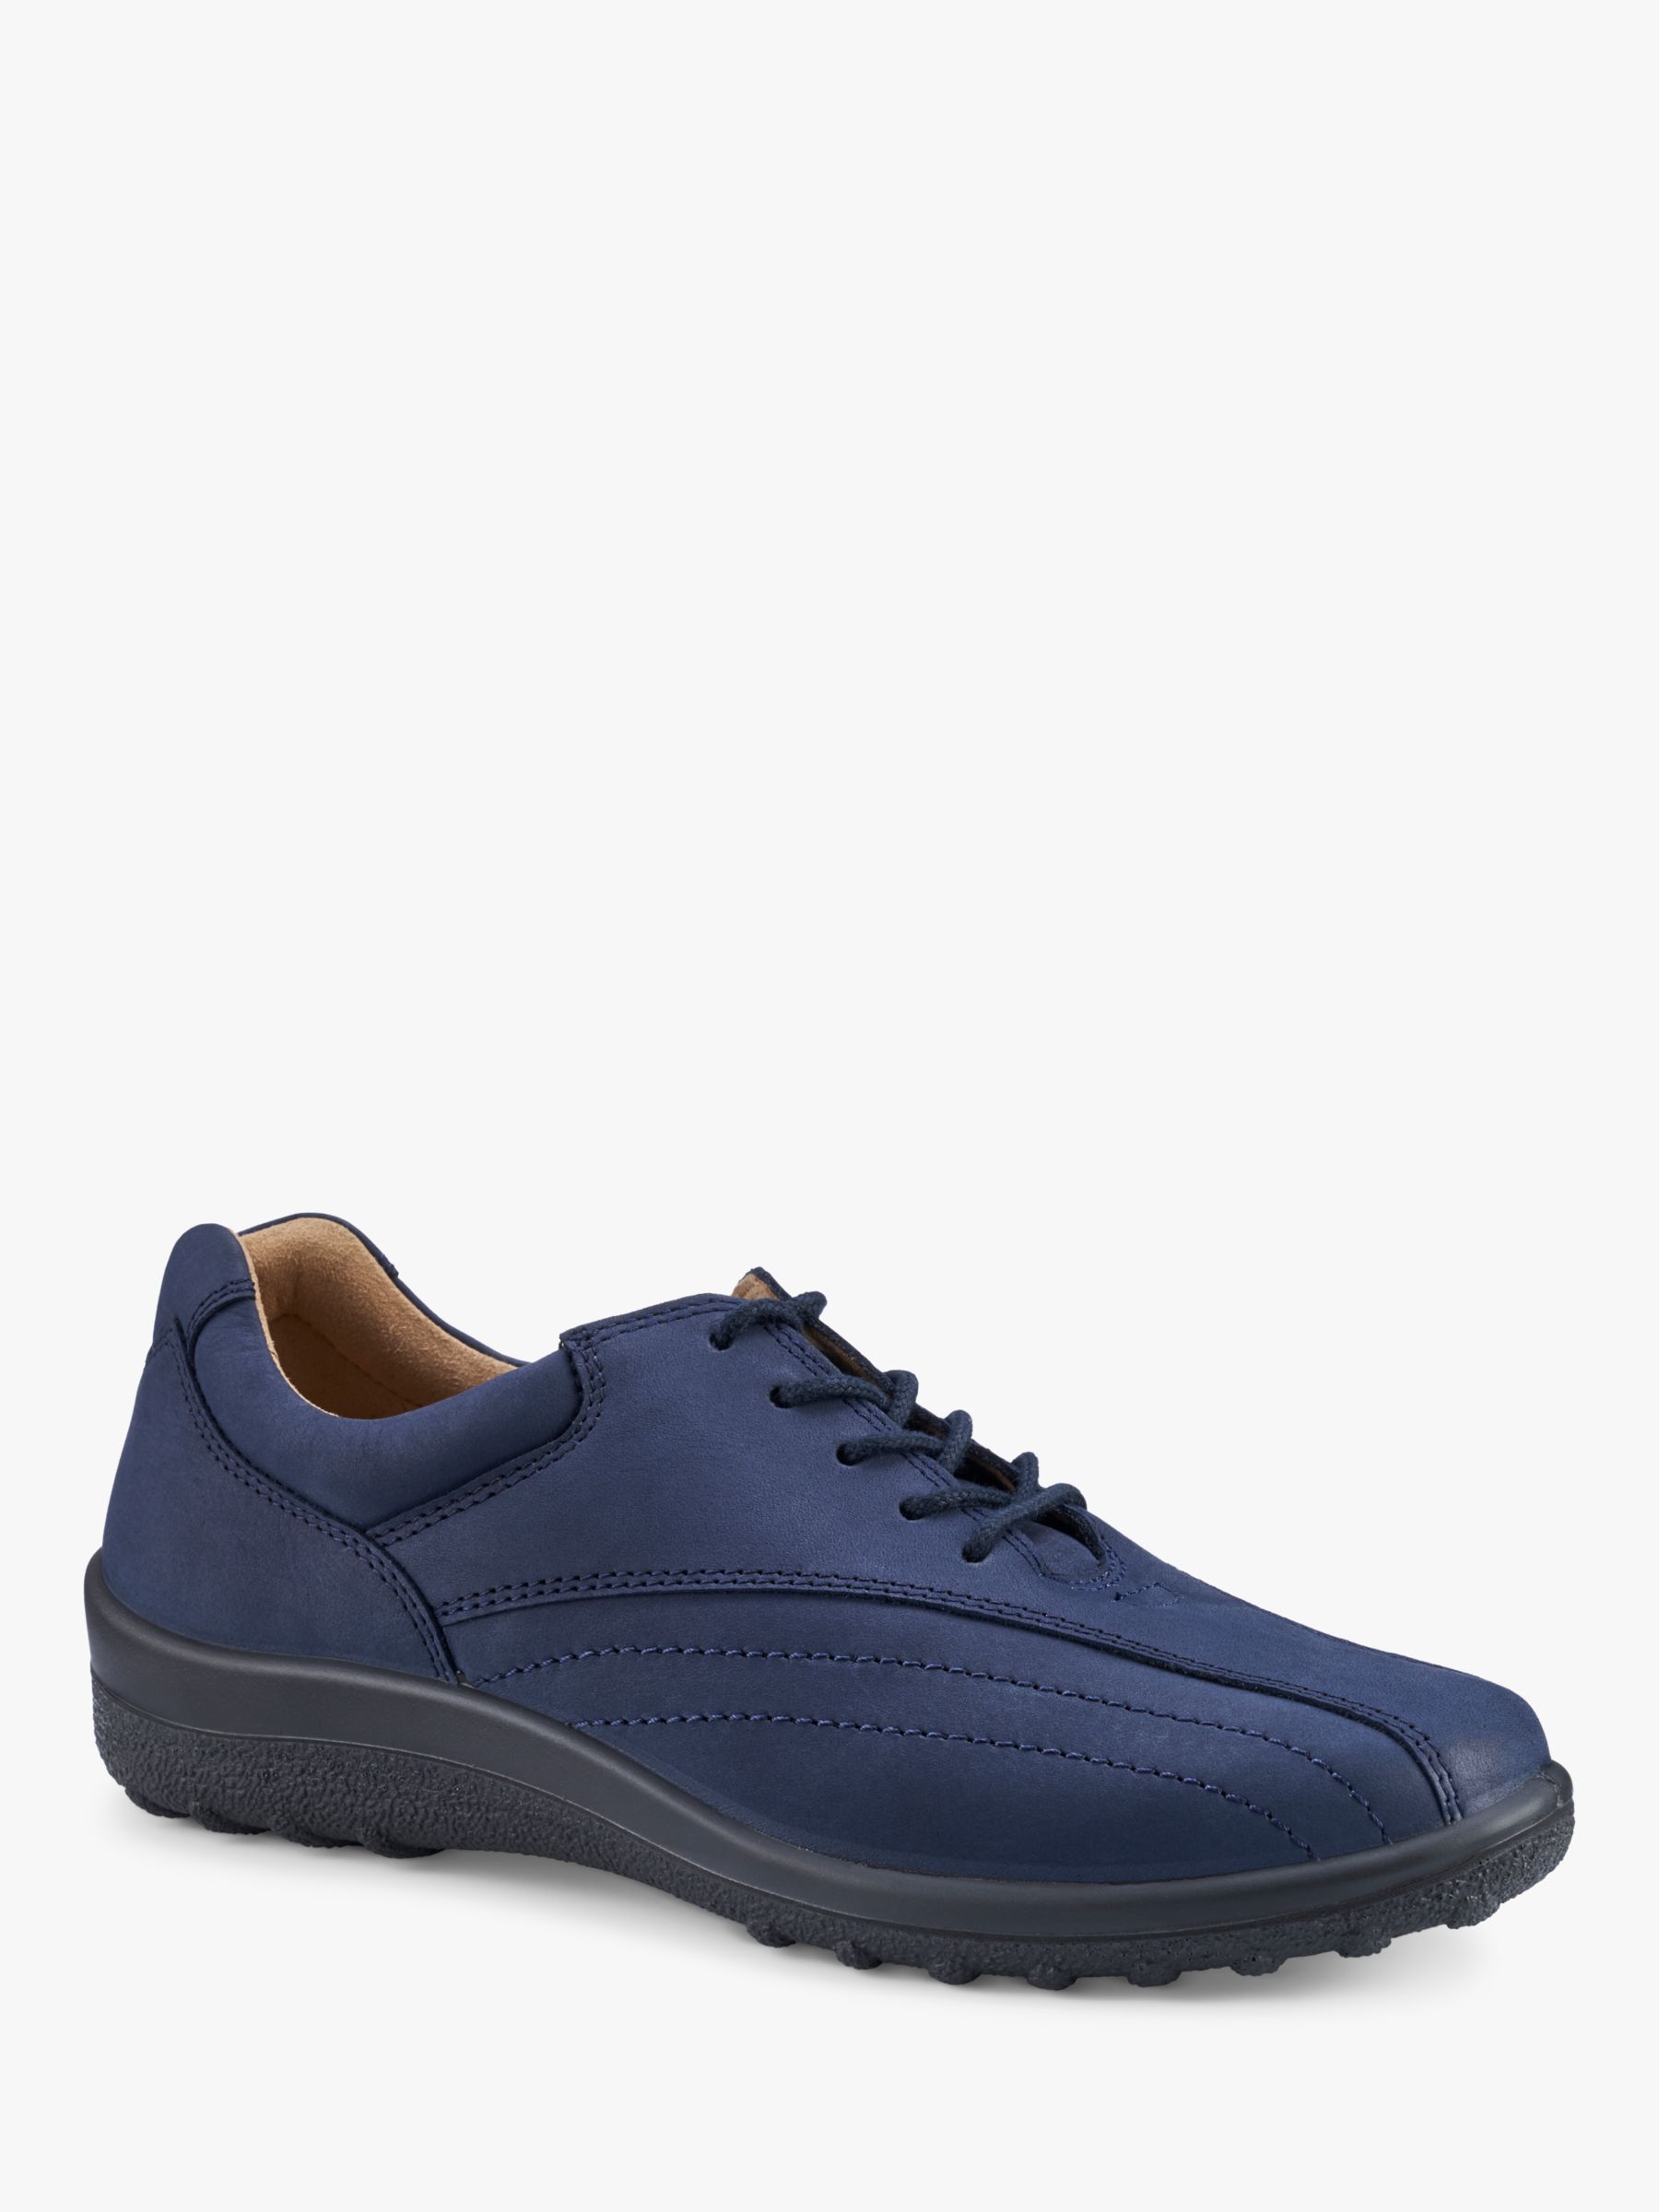 Hotter Tone II Wide Fit Classic Nubuck Bowling Style Shoes, Denim Navy, 7